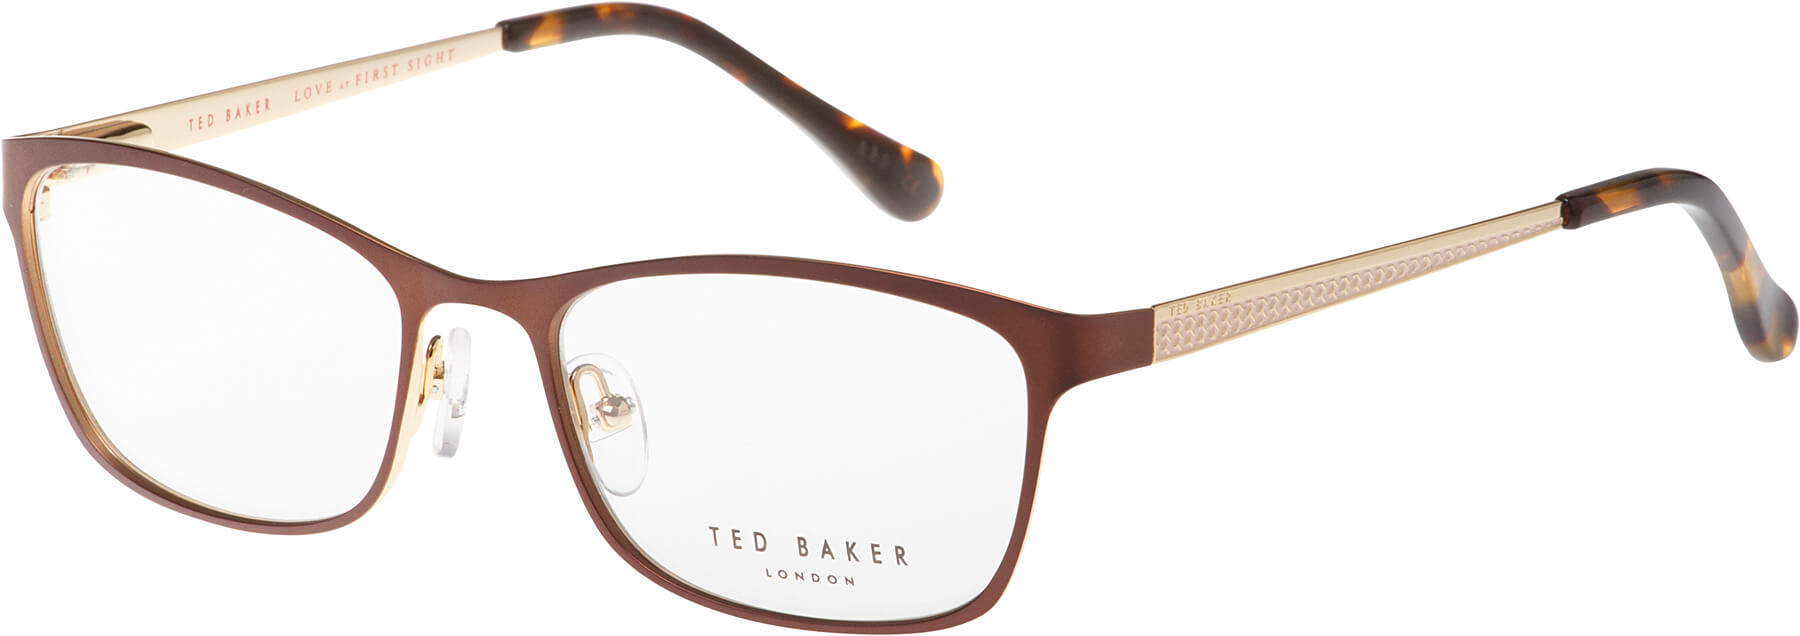 Ted Baker Alona 2234 image number null